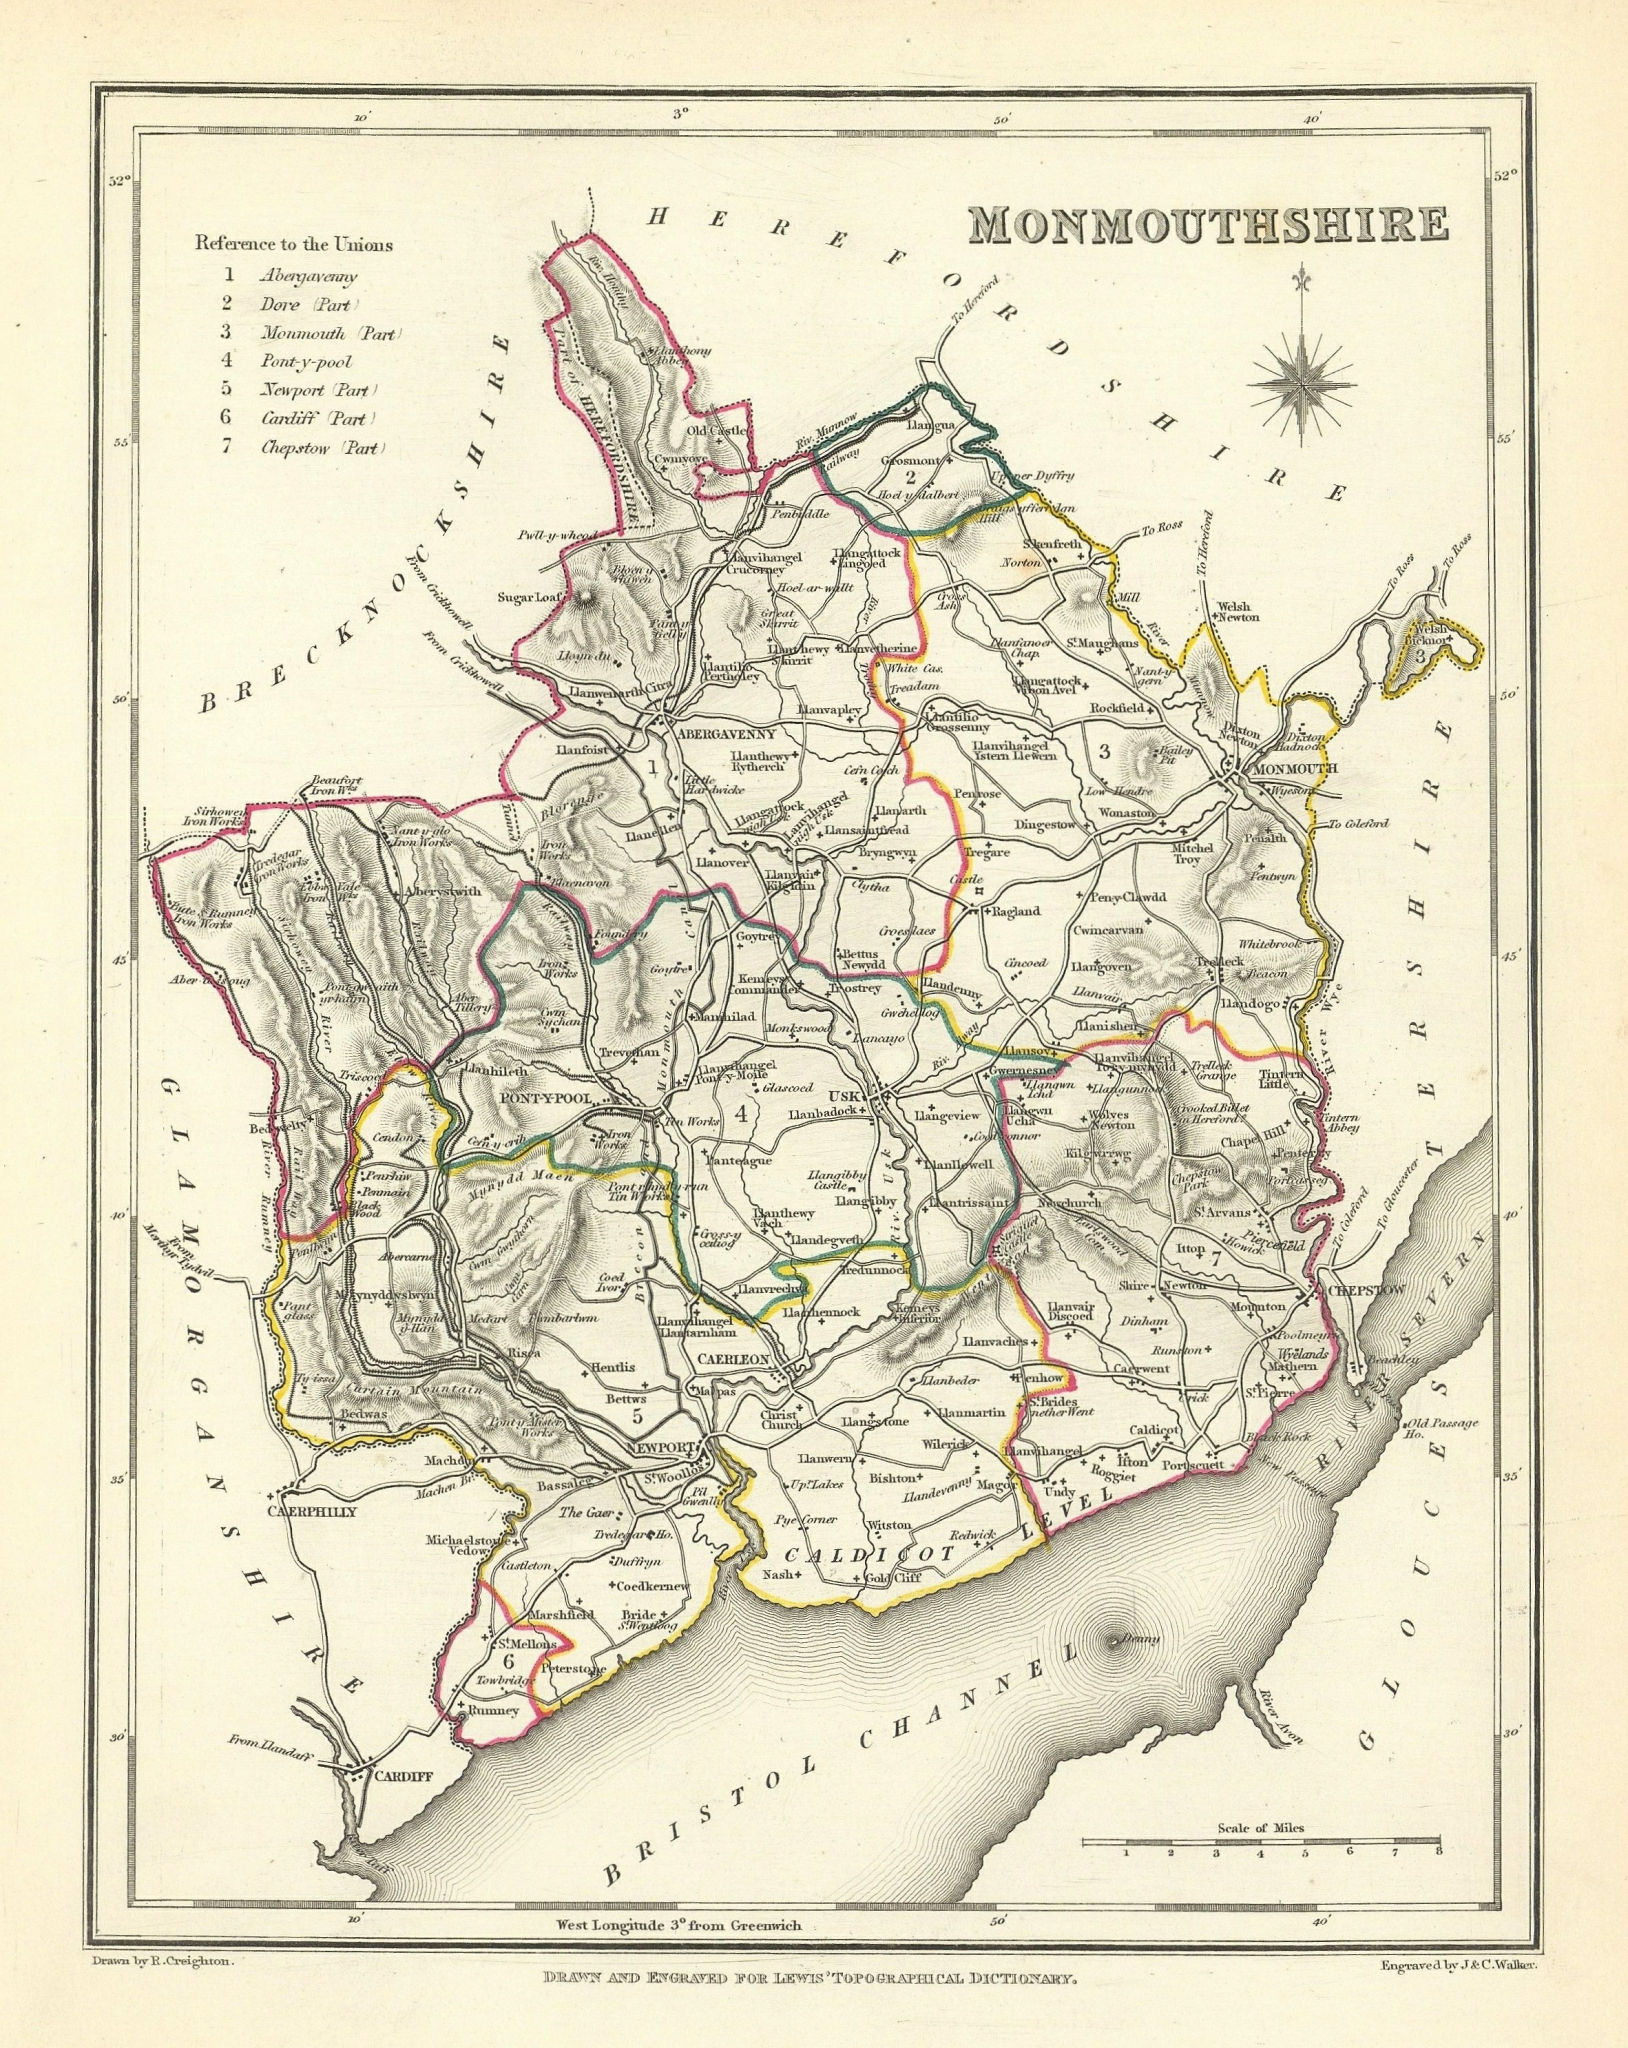 Associate Product Antique county map of MONMOUTHSHIRE by Creighton & Walker for Lewis c1840